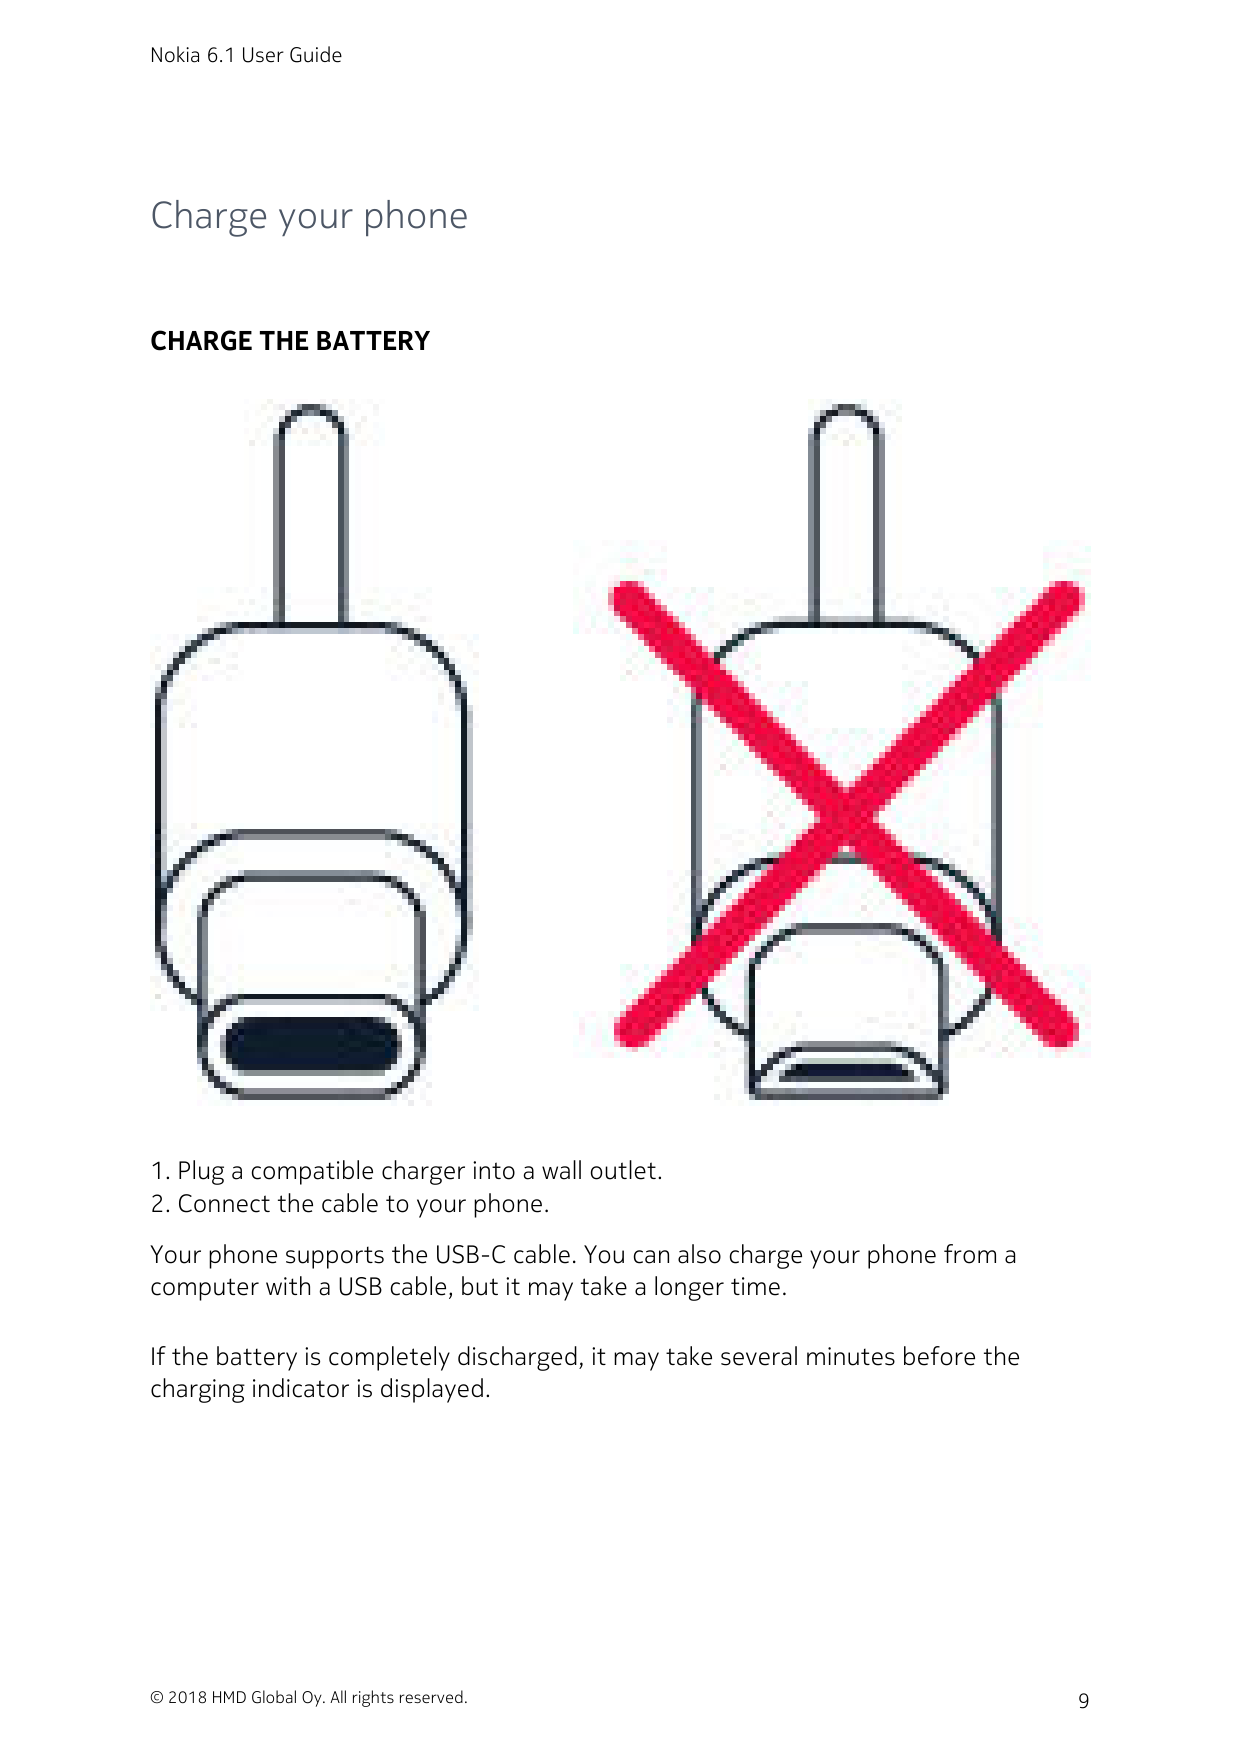 Nokia 6.1 User GuideCharge your phoneCHARGE THE BATTERY1. Plug a compatible charger into a wall outlet.2. Connect the cable to y